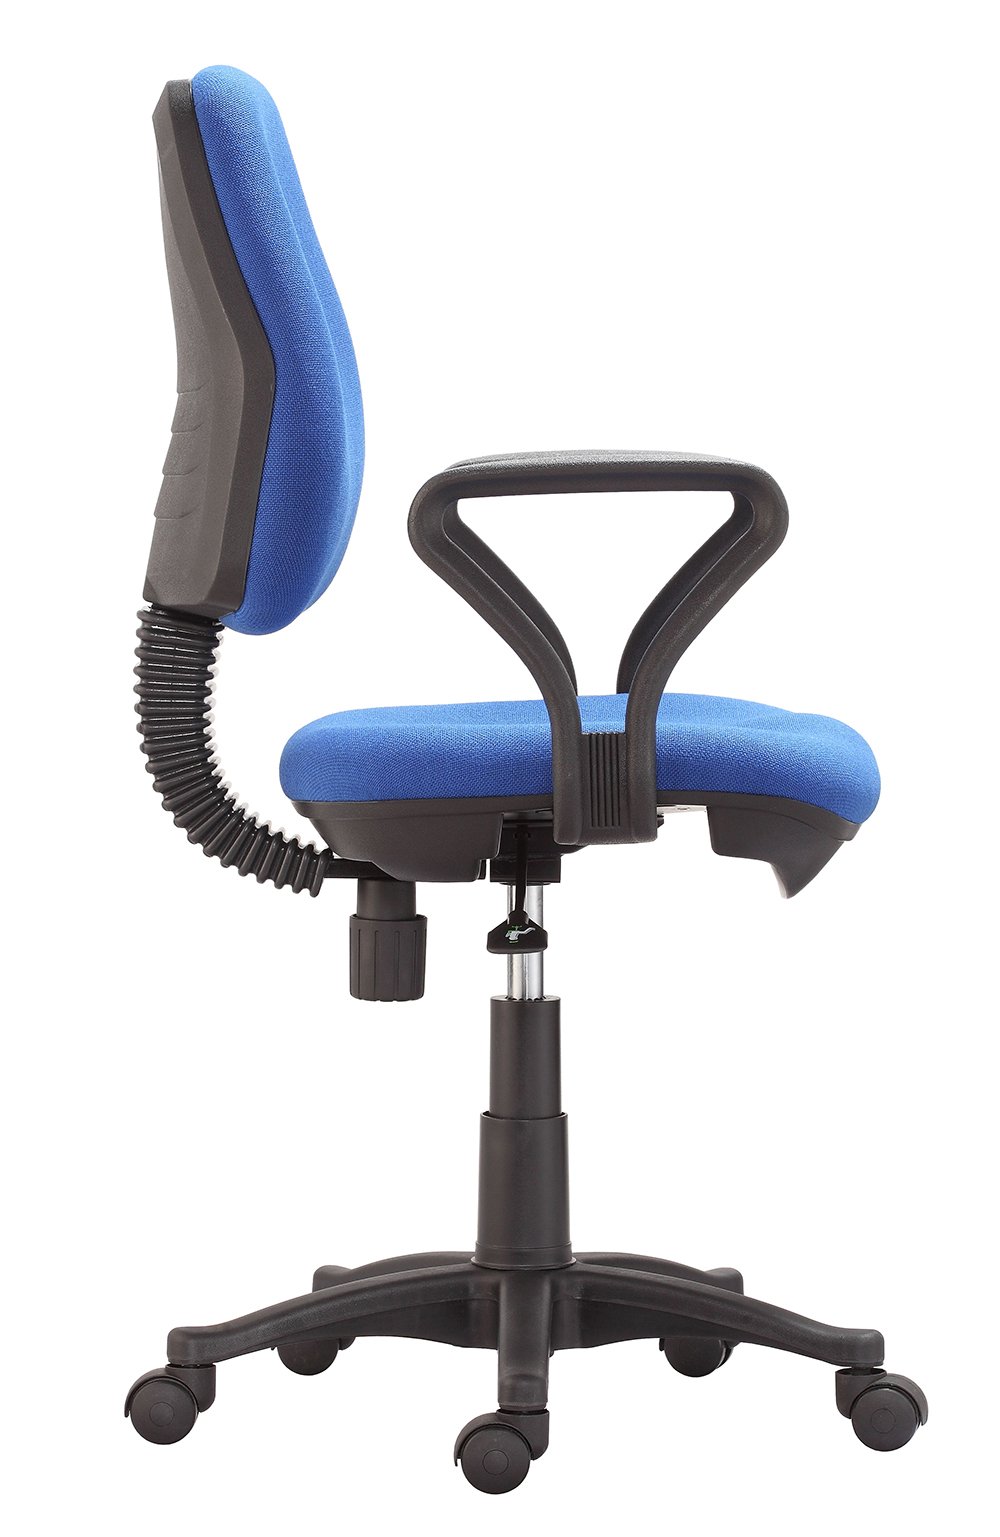 Budget Economy Operators Chair with arms ex stock in Blue,Black,Wine,Charcoal fabric or Black Vinyl